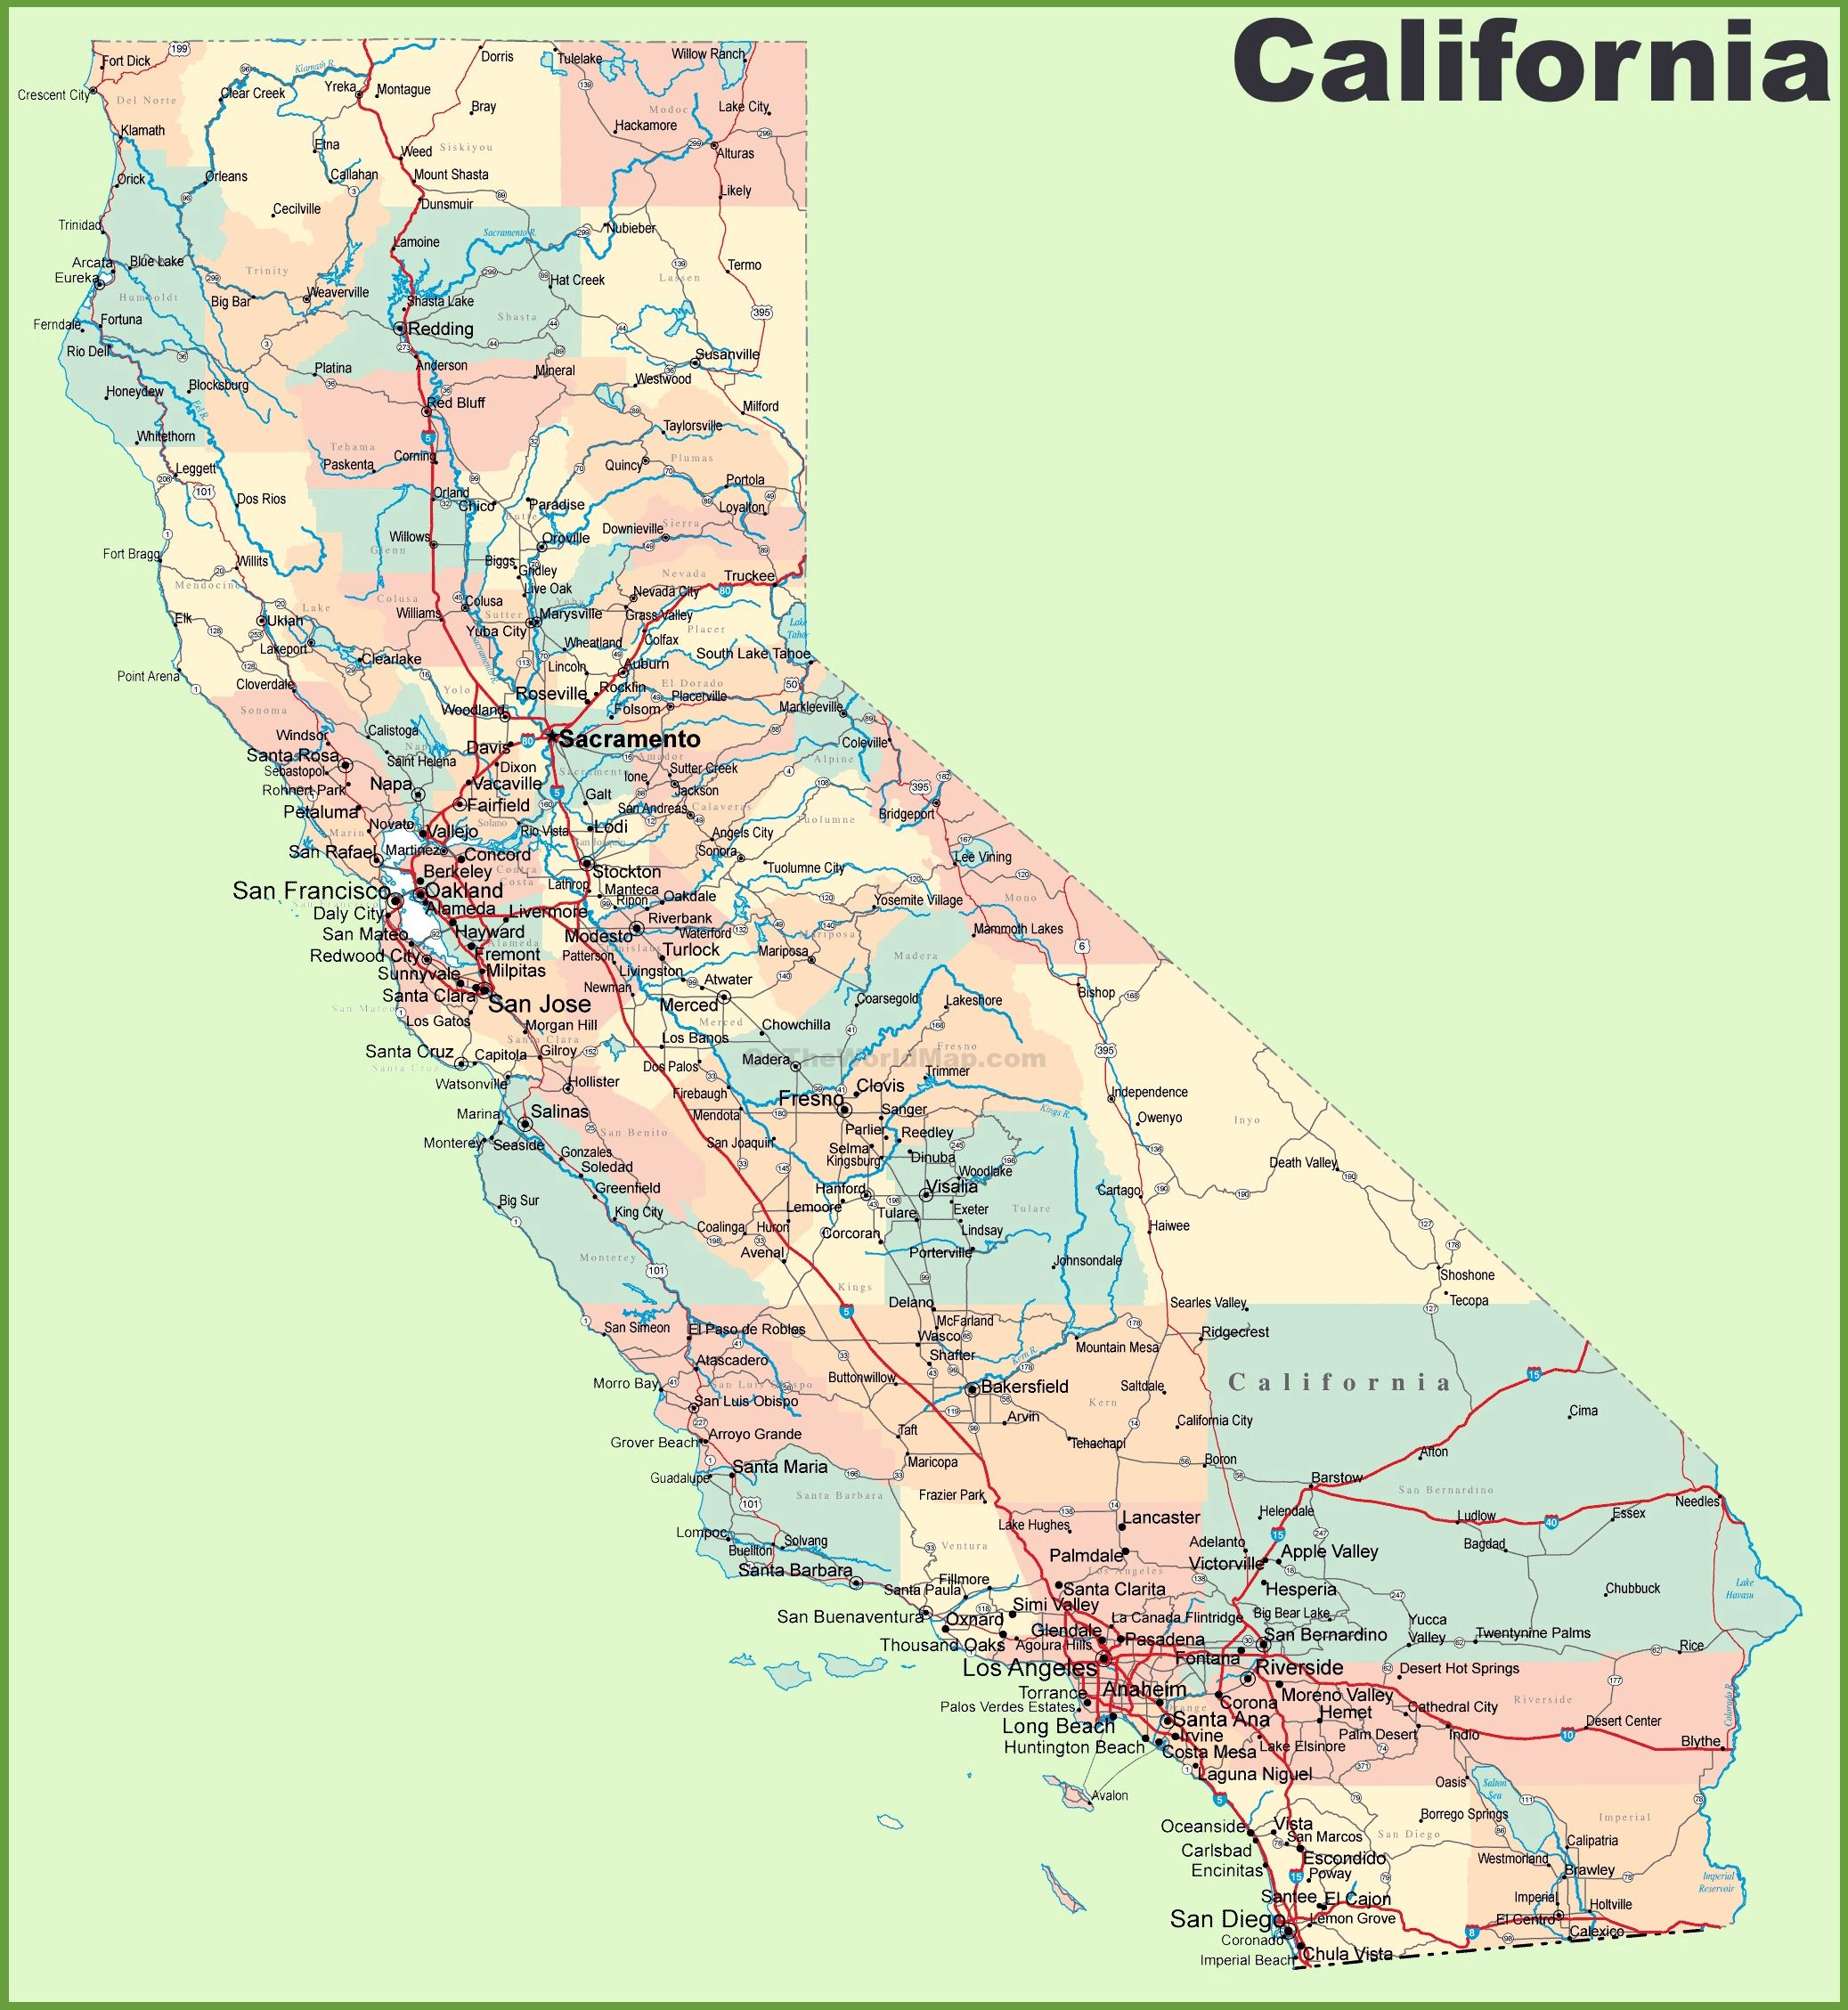 Large California Maps For Free Download And Print | High-Resolution - Map Of California Cities And Towns